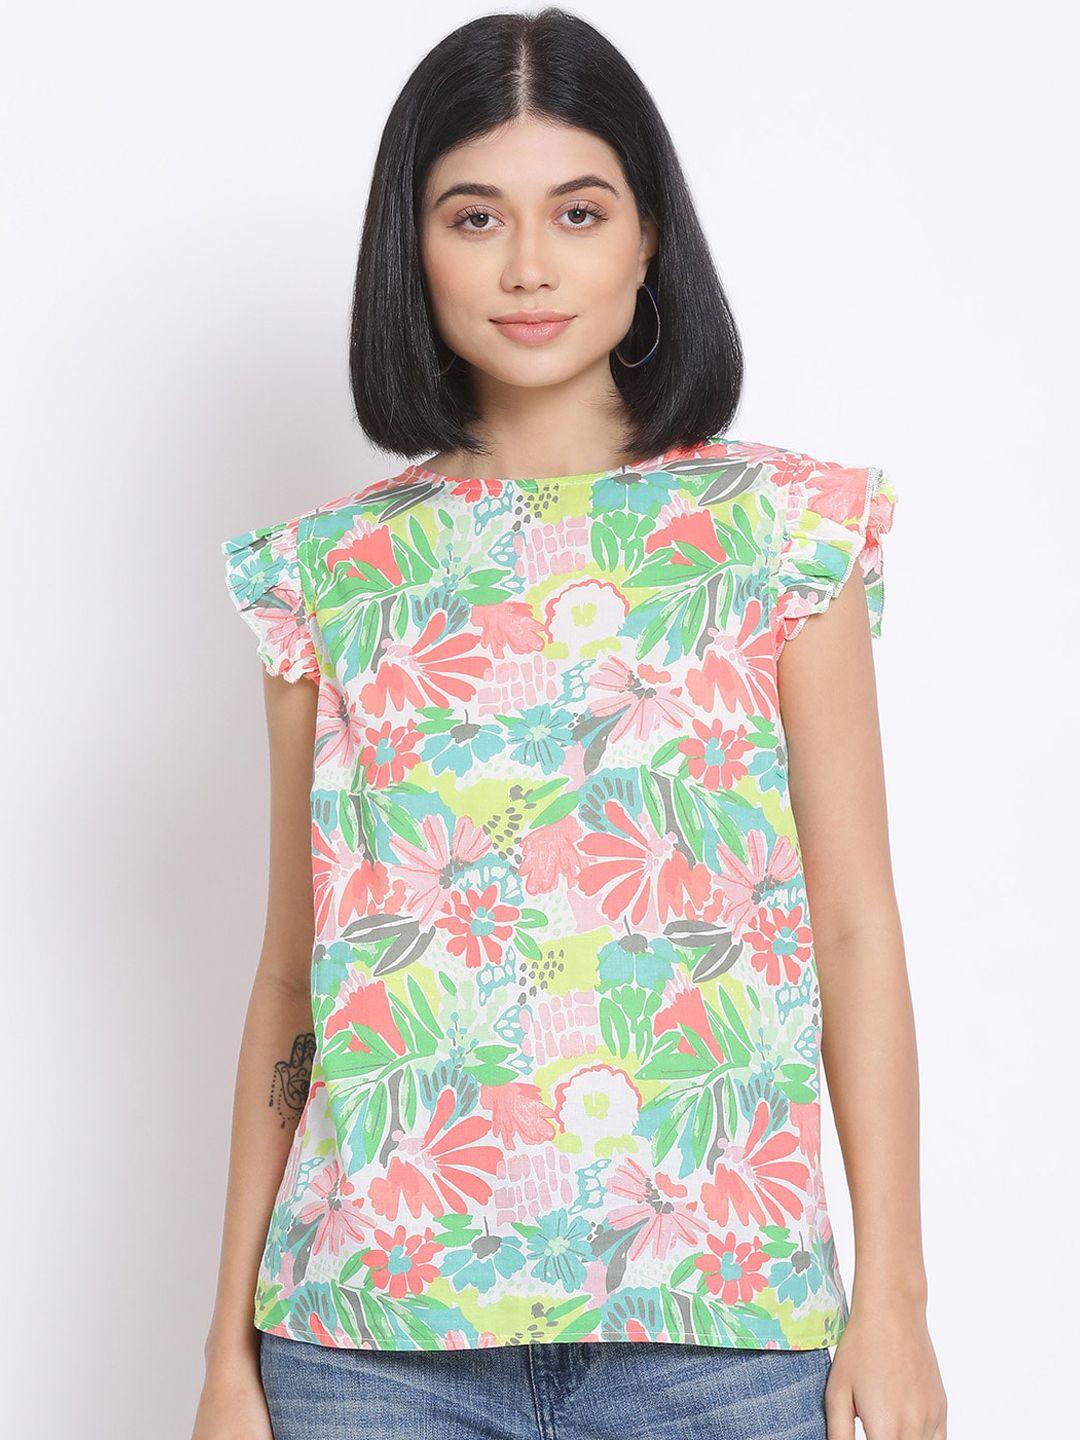 oxolloxo multicoloured floral printed regular top